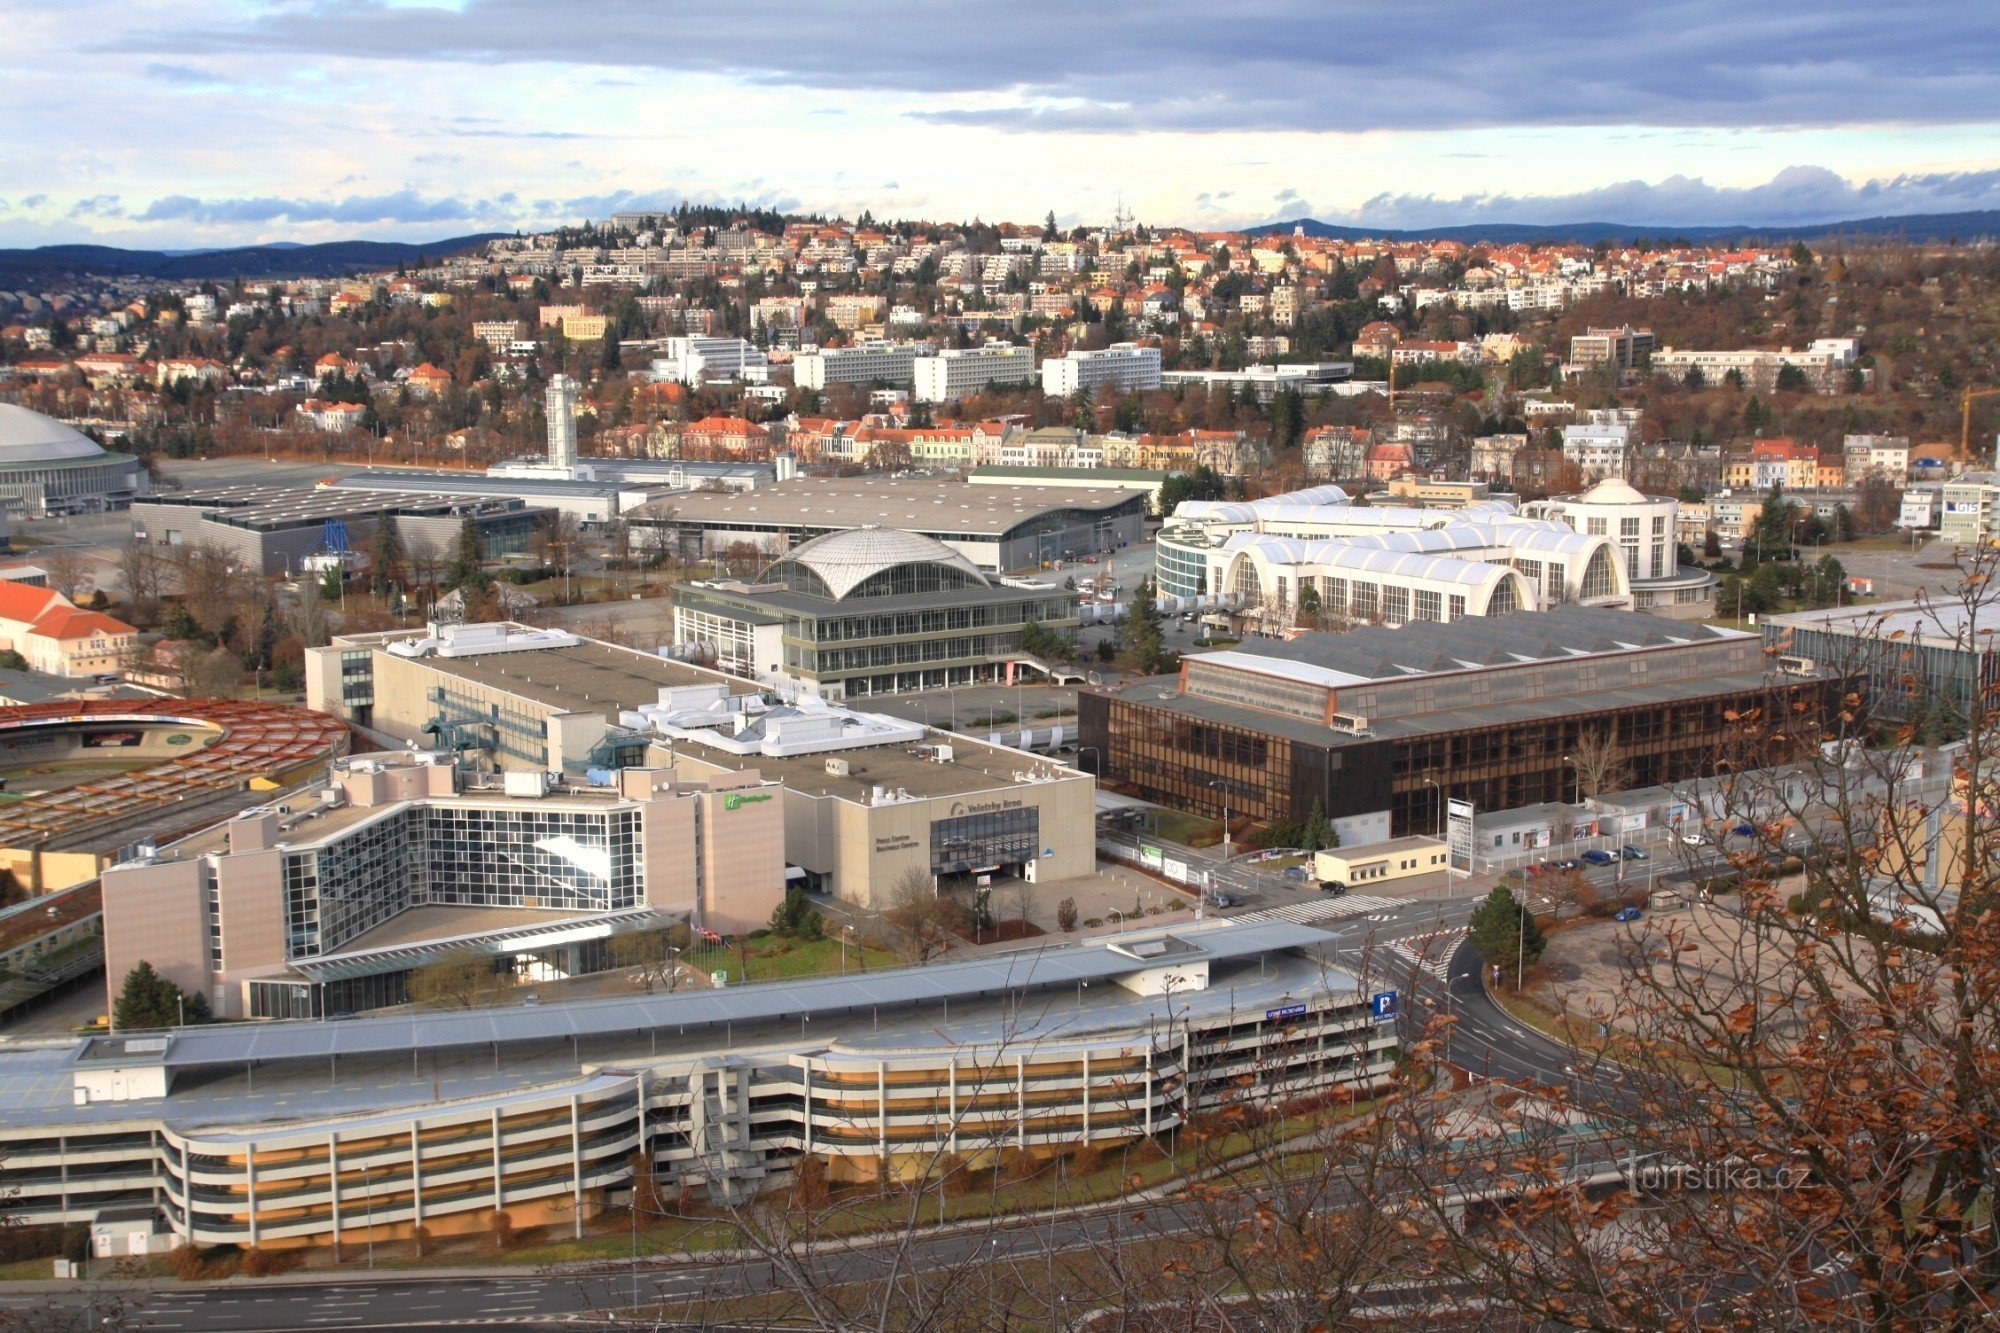 View from the viewpoint of the central part of the Exhibition Center, with the Masaryk district in the background